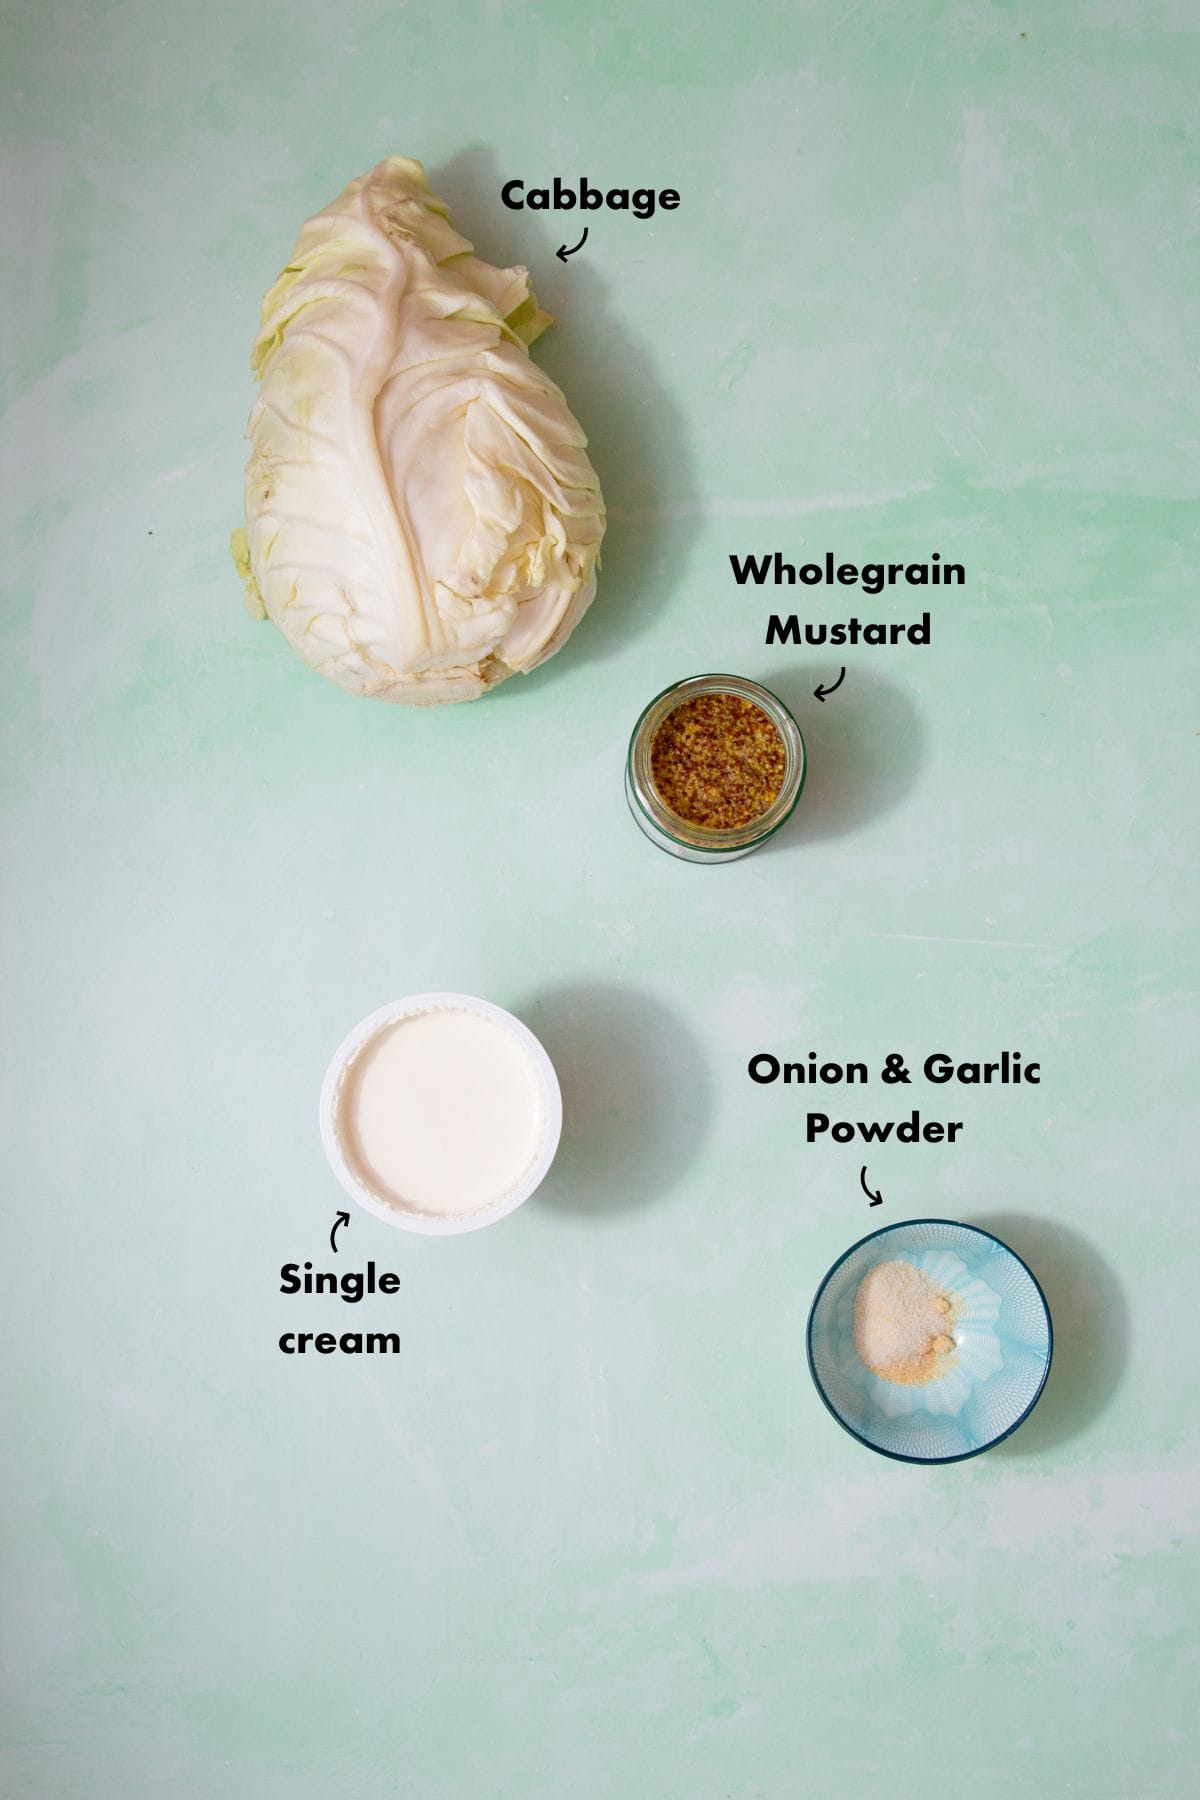 Ingredients to make creamed cabbage laid out on a plae blue back ground and labelled.